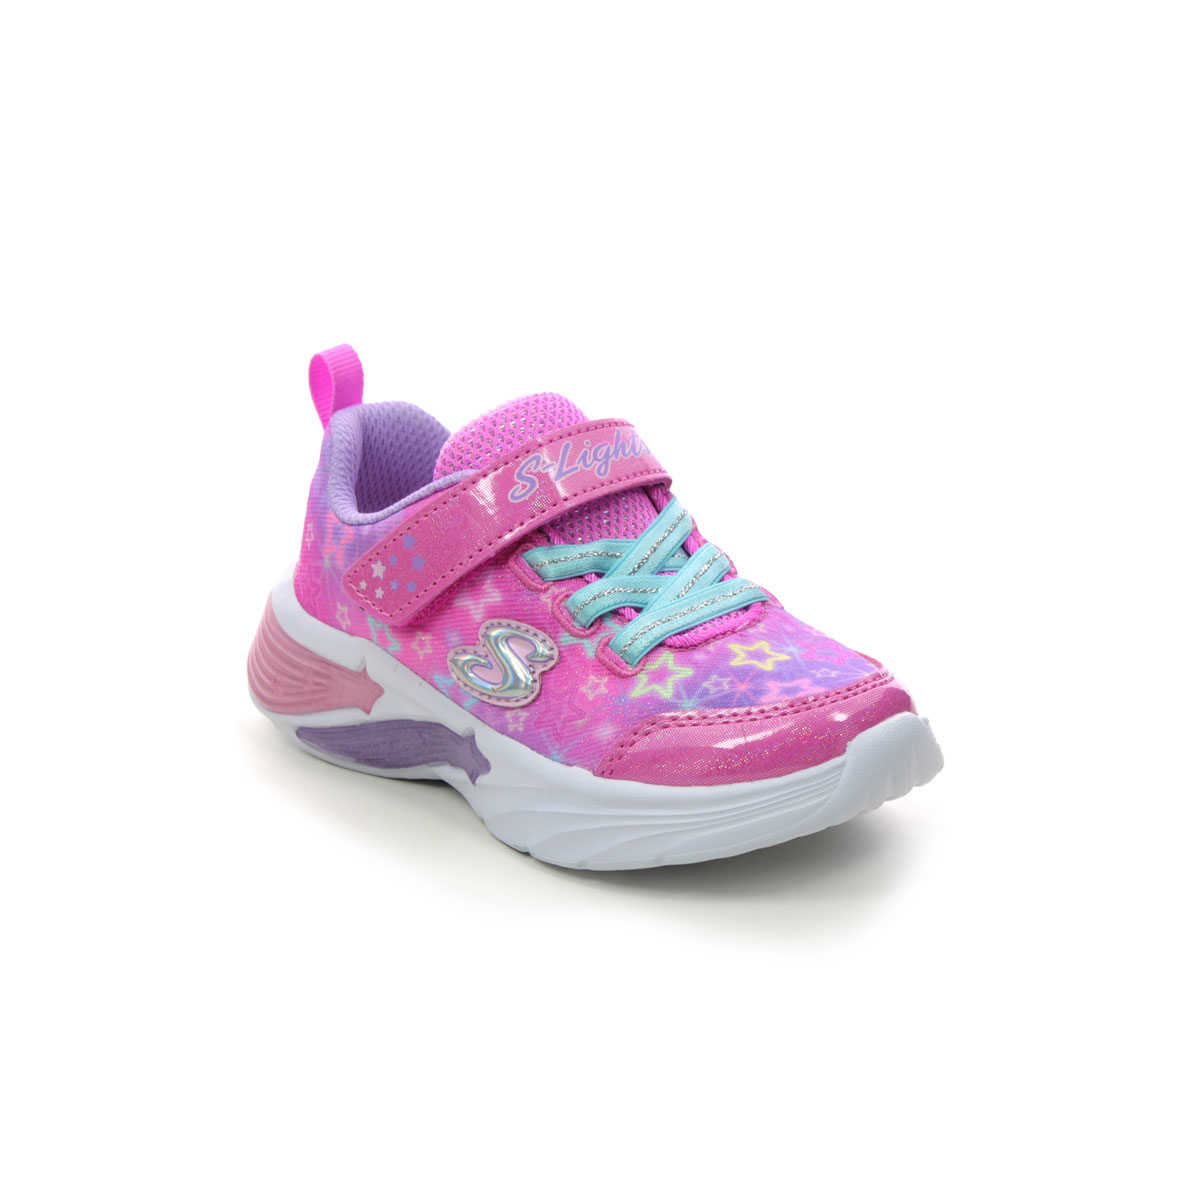 Skechers Star Sparks Inf Pink Kids Girls Trainers 302324N In Size 26 In Plain Pink